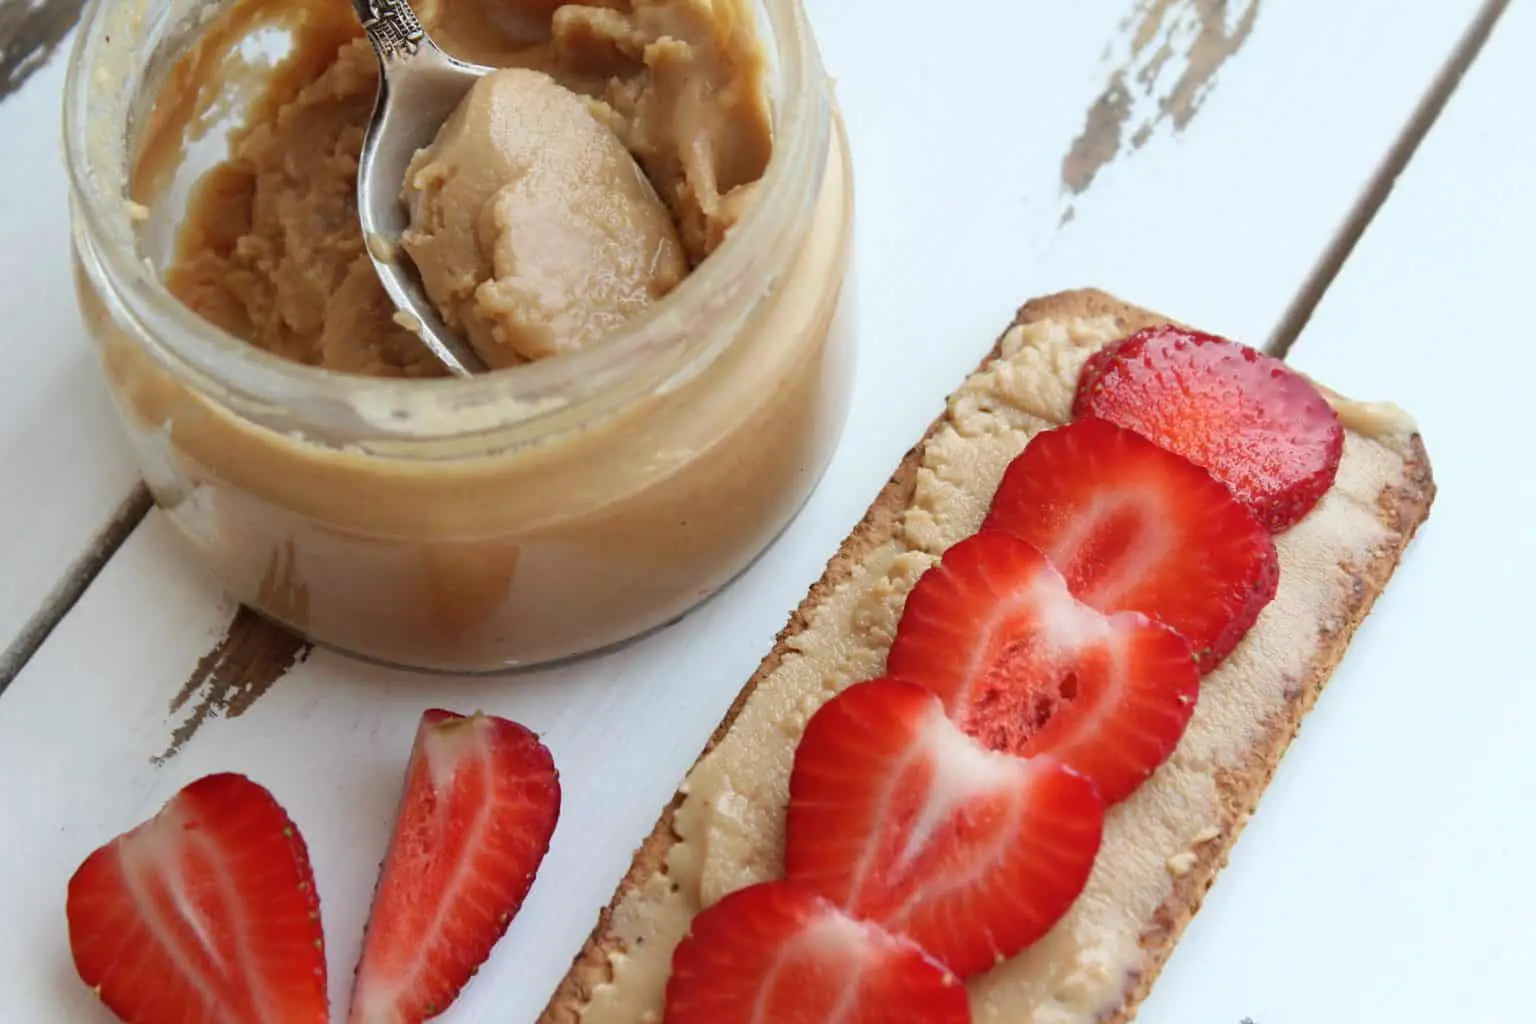 Peanut butter and slices of a strawberry